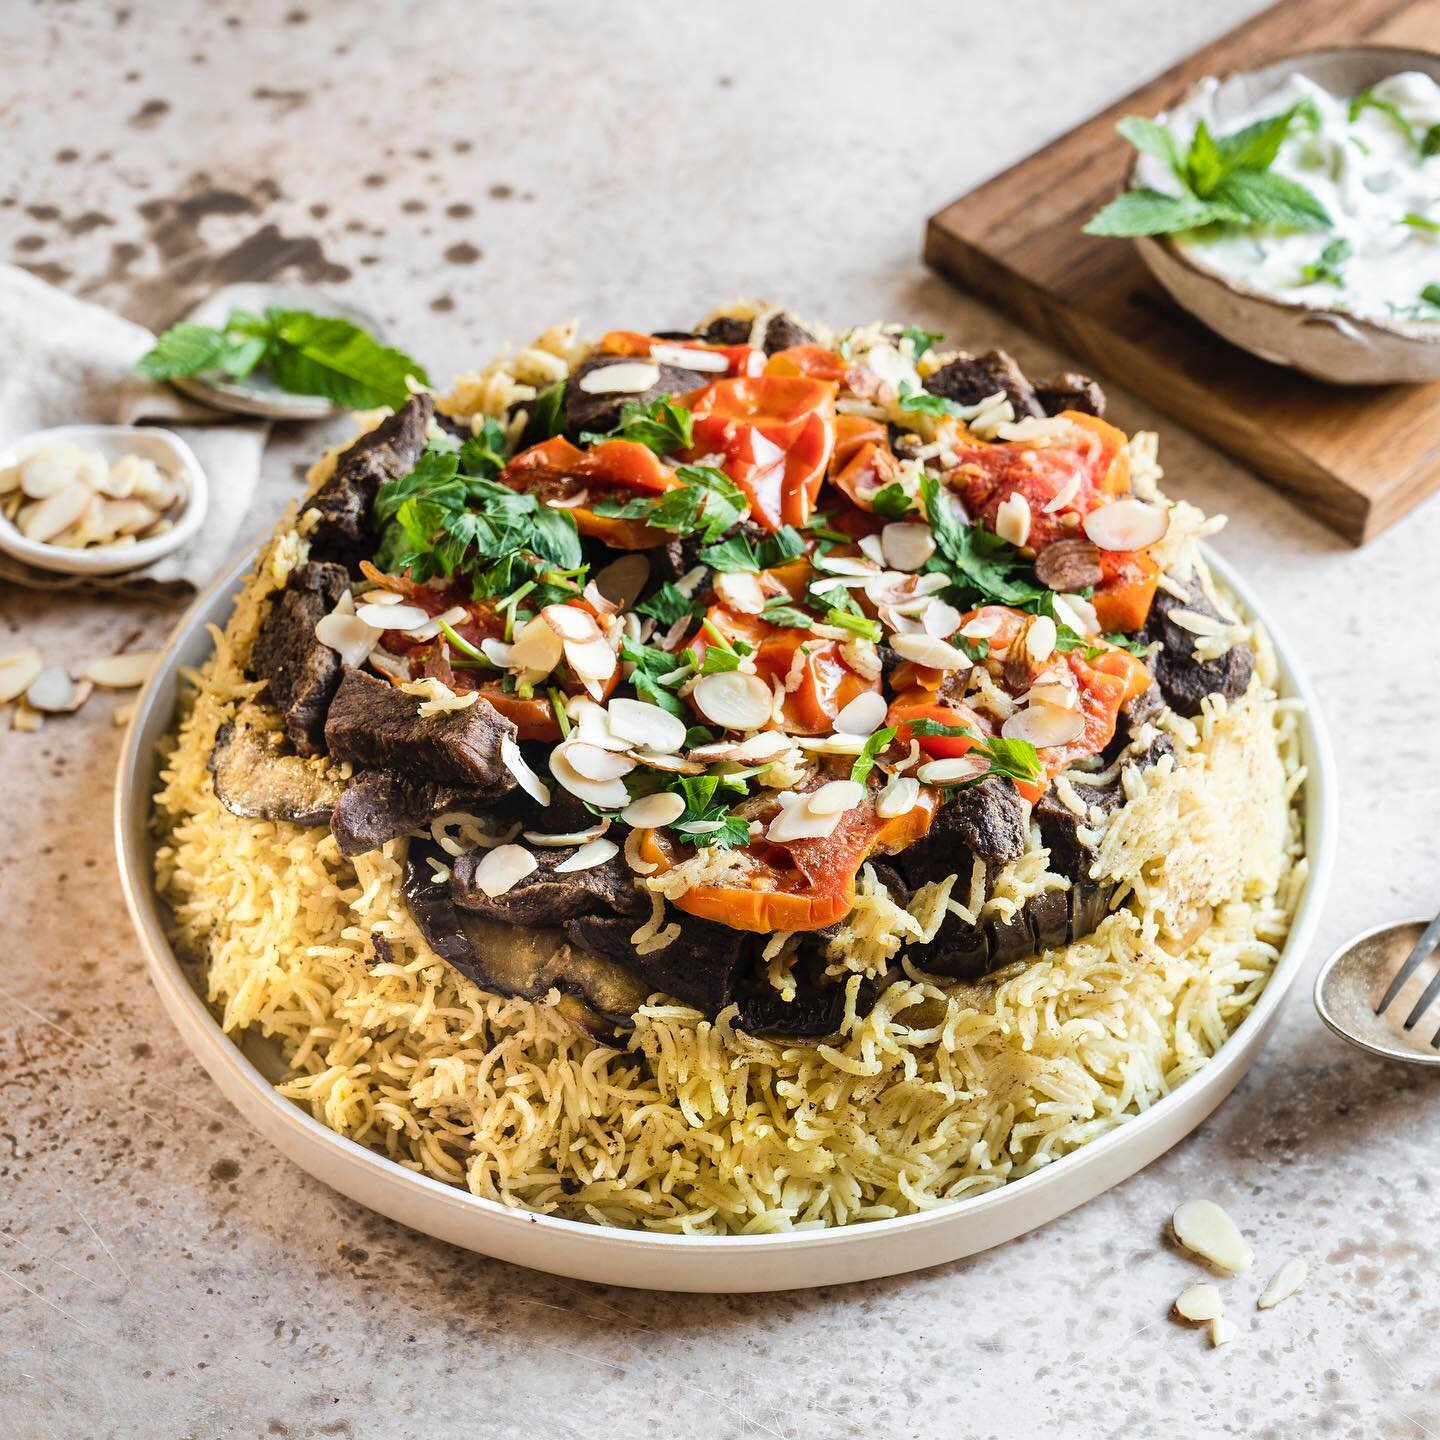 Maqlouba.. a family favorite and one of my go-to &ldquo;clean out the fridge&rdquo; dinners! I make it easy on myself by roasting my veggies and using what I have on hand rather than sticking to the traditional eggplant and cauliflower.. carrots, egg